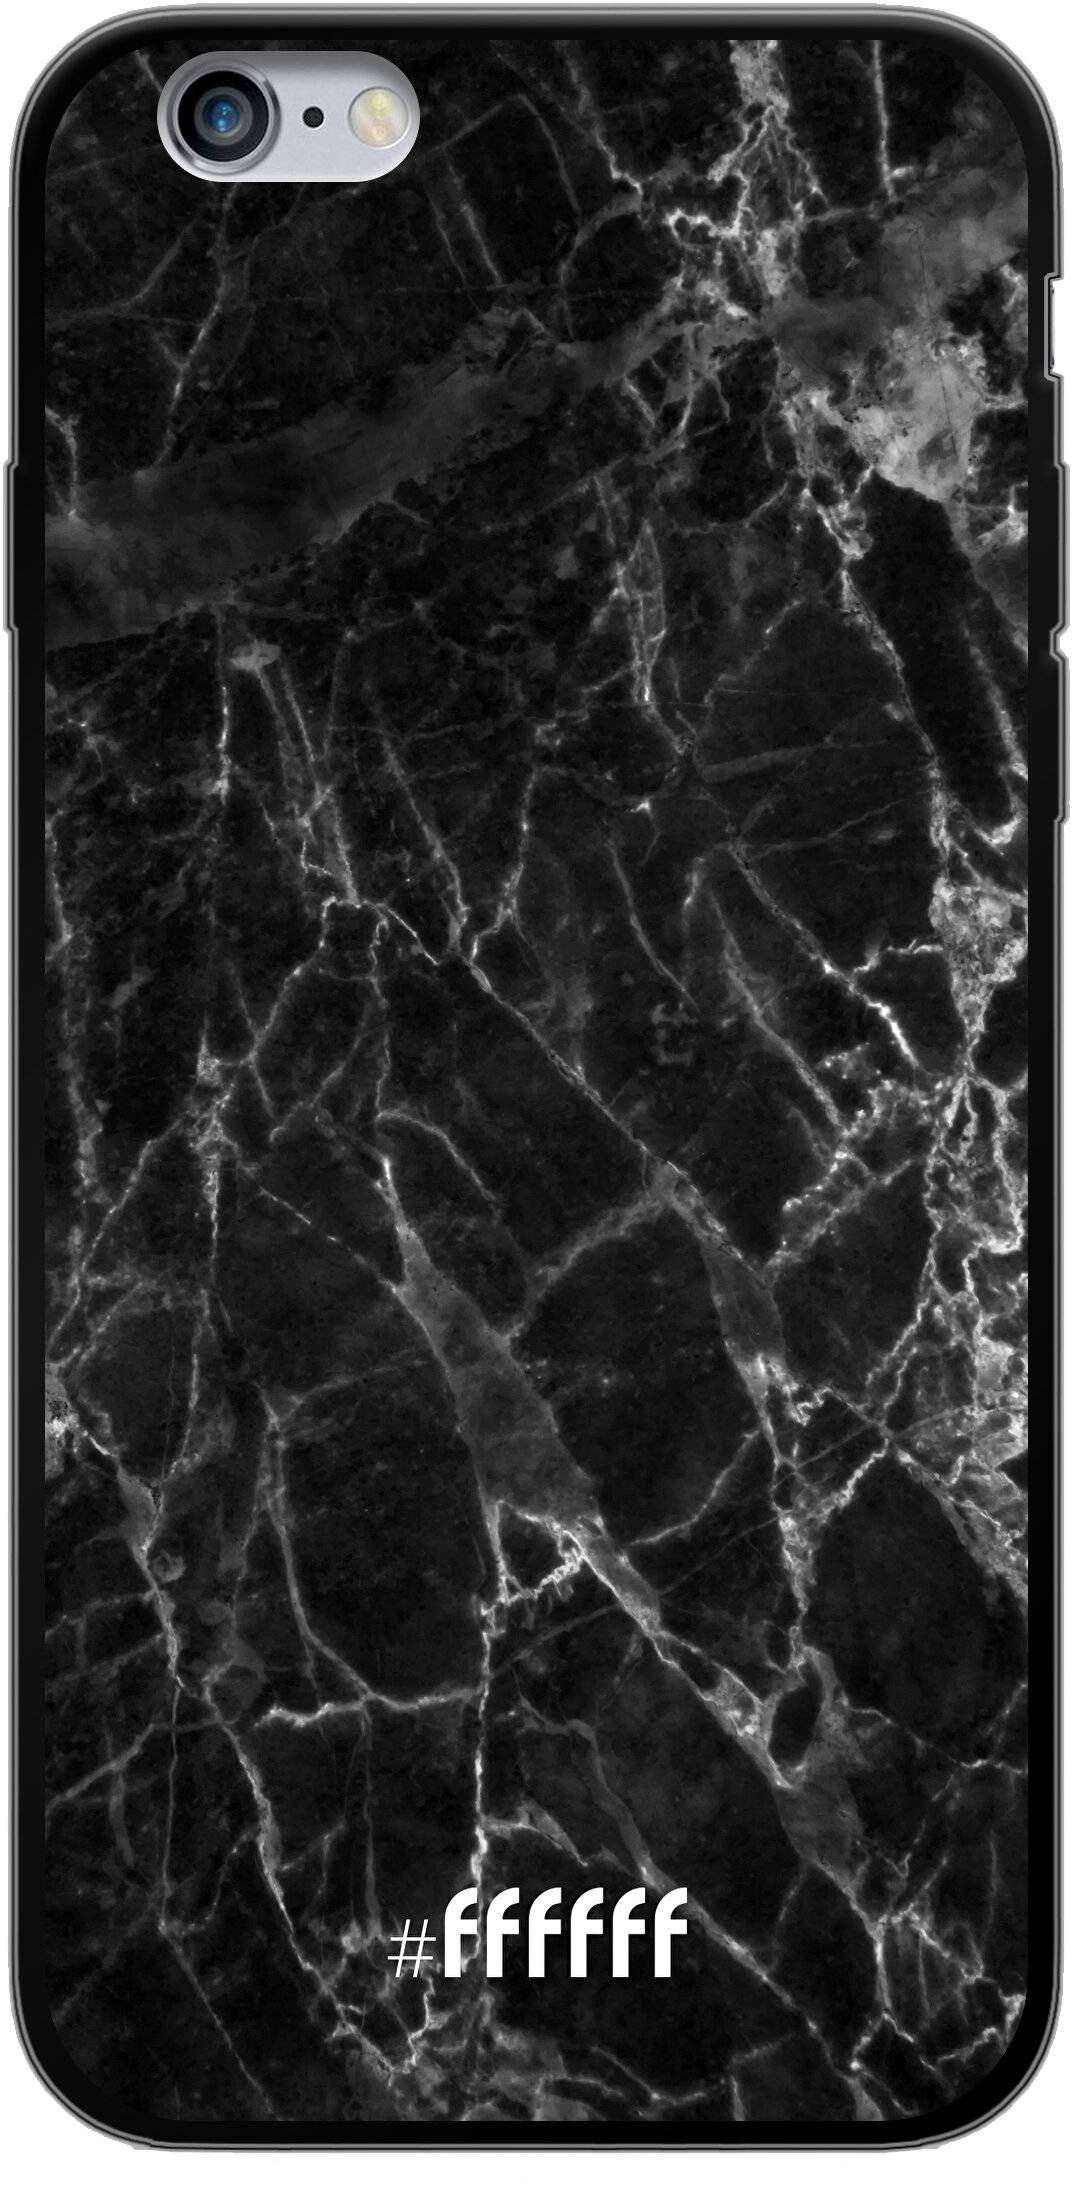 Shattered Marble iPhone 6